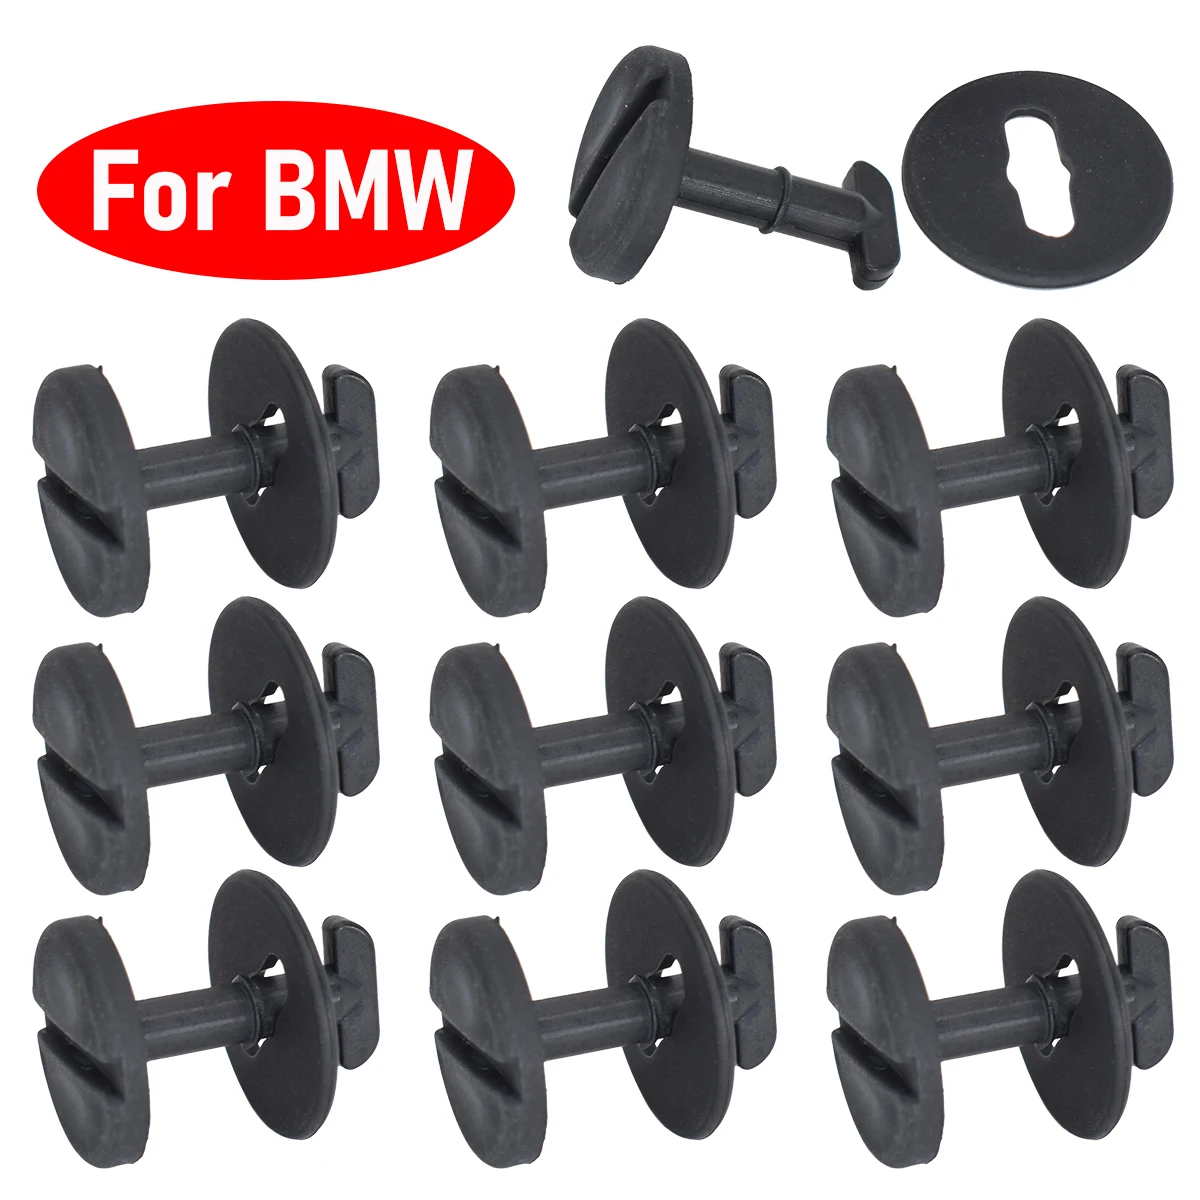 10Pcs Floor Carpet Mat Clips Twist Lock With Washers For BMW E32 E34 E36... - $10.41